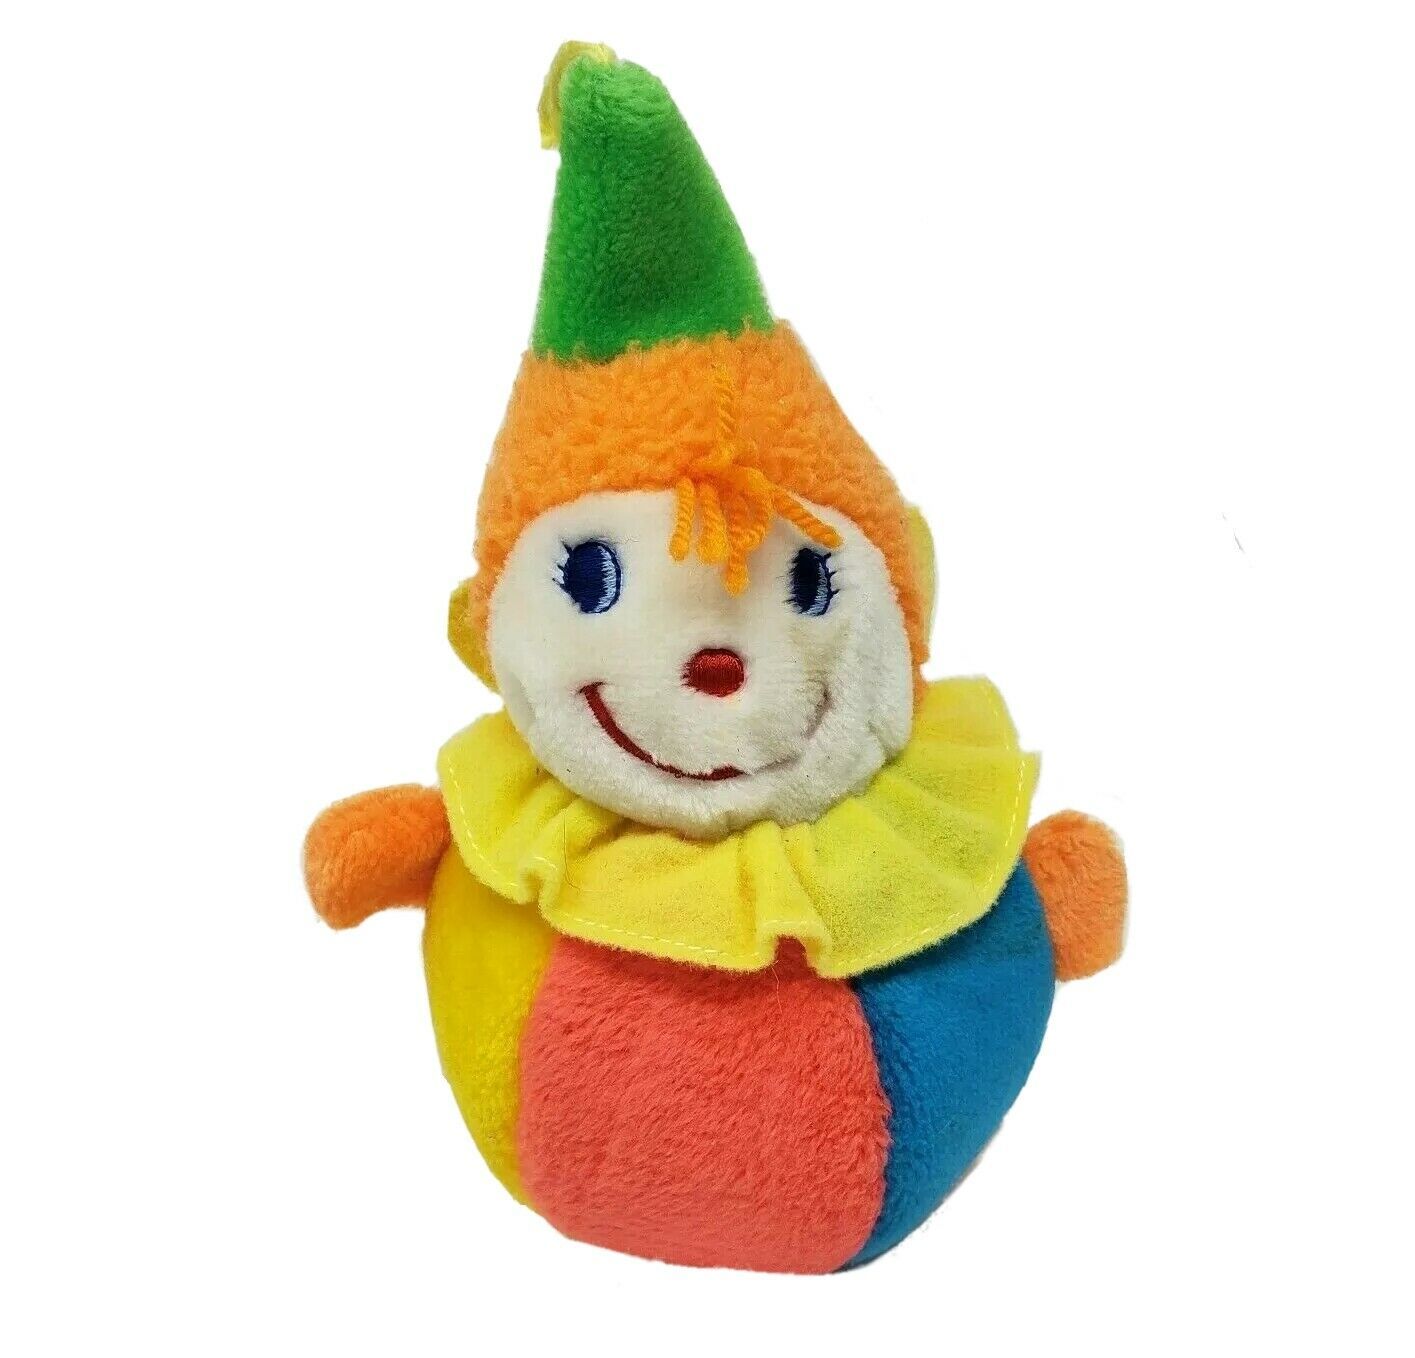 Primary image for VINTAGE 1982 GUND BABY COLORFUL CLOWN CHIME RATTLE STUFFED ANIMAL PLUSH TOY DOLL